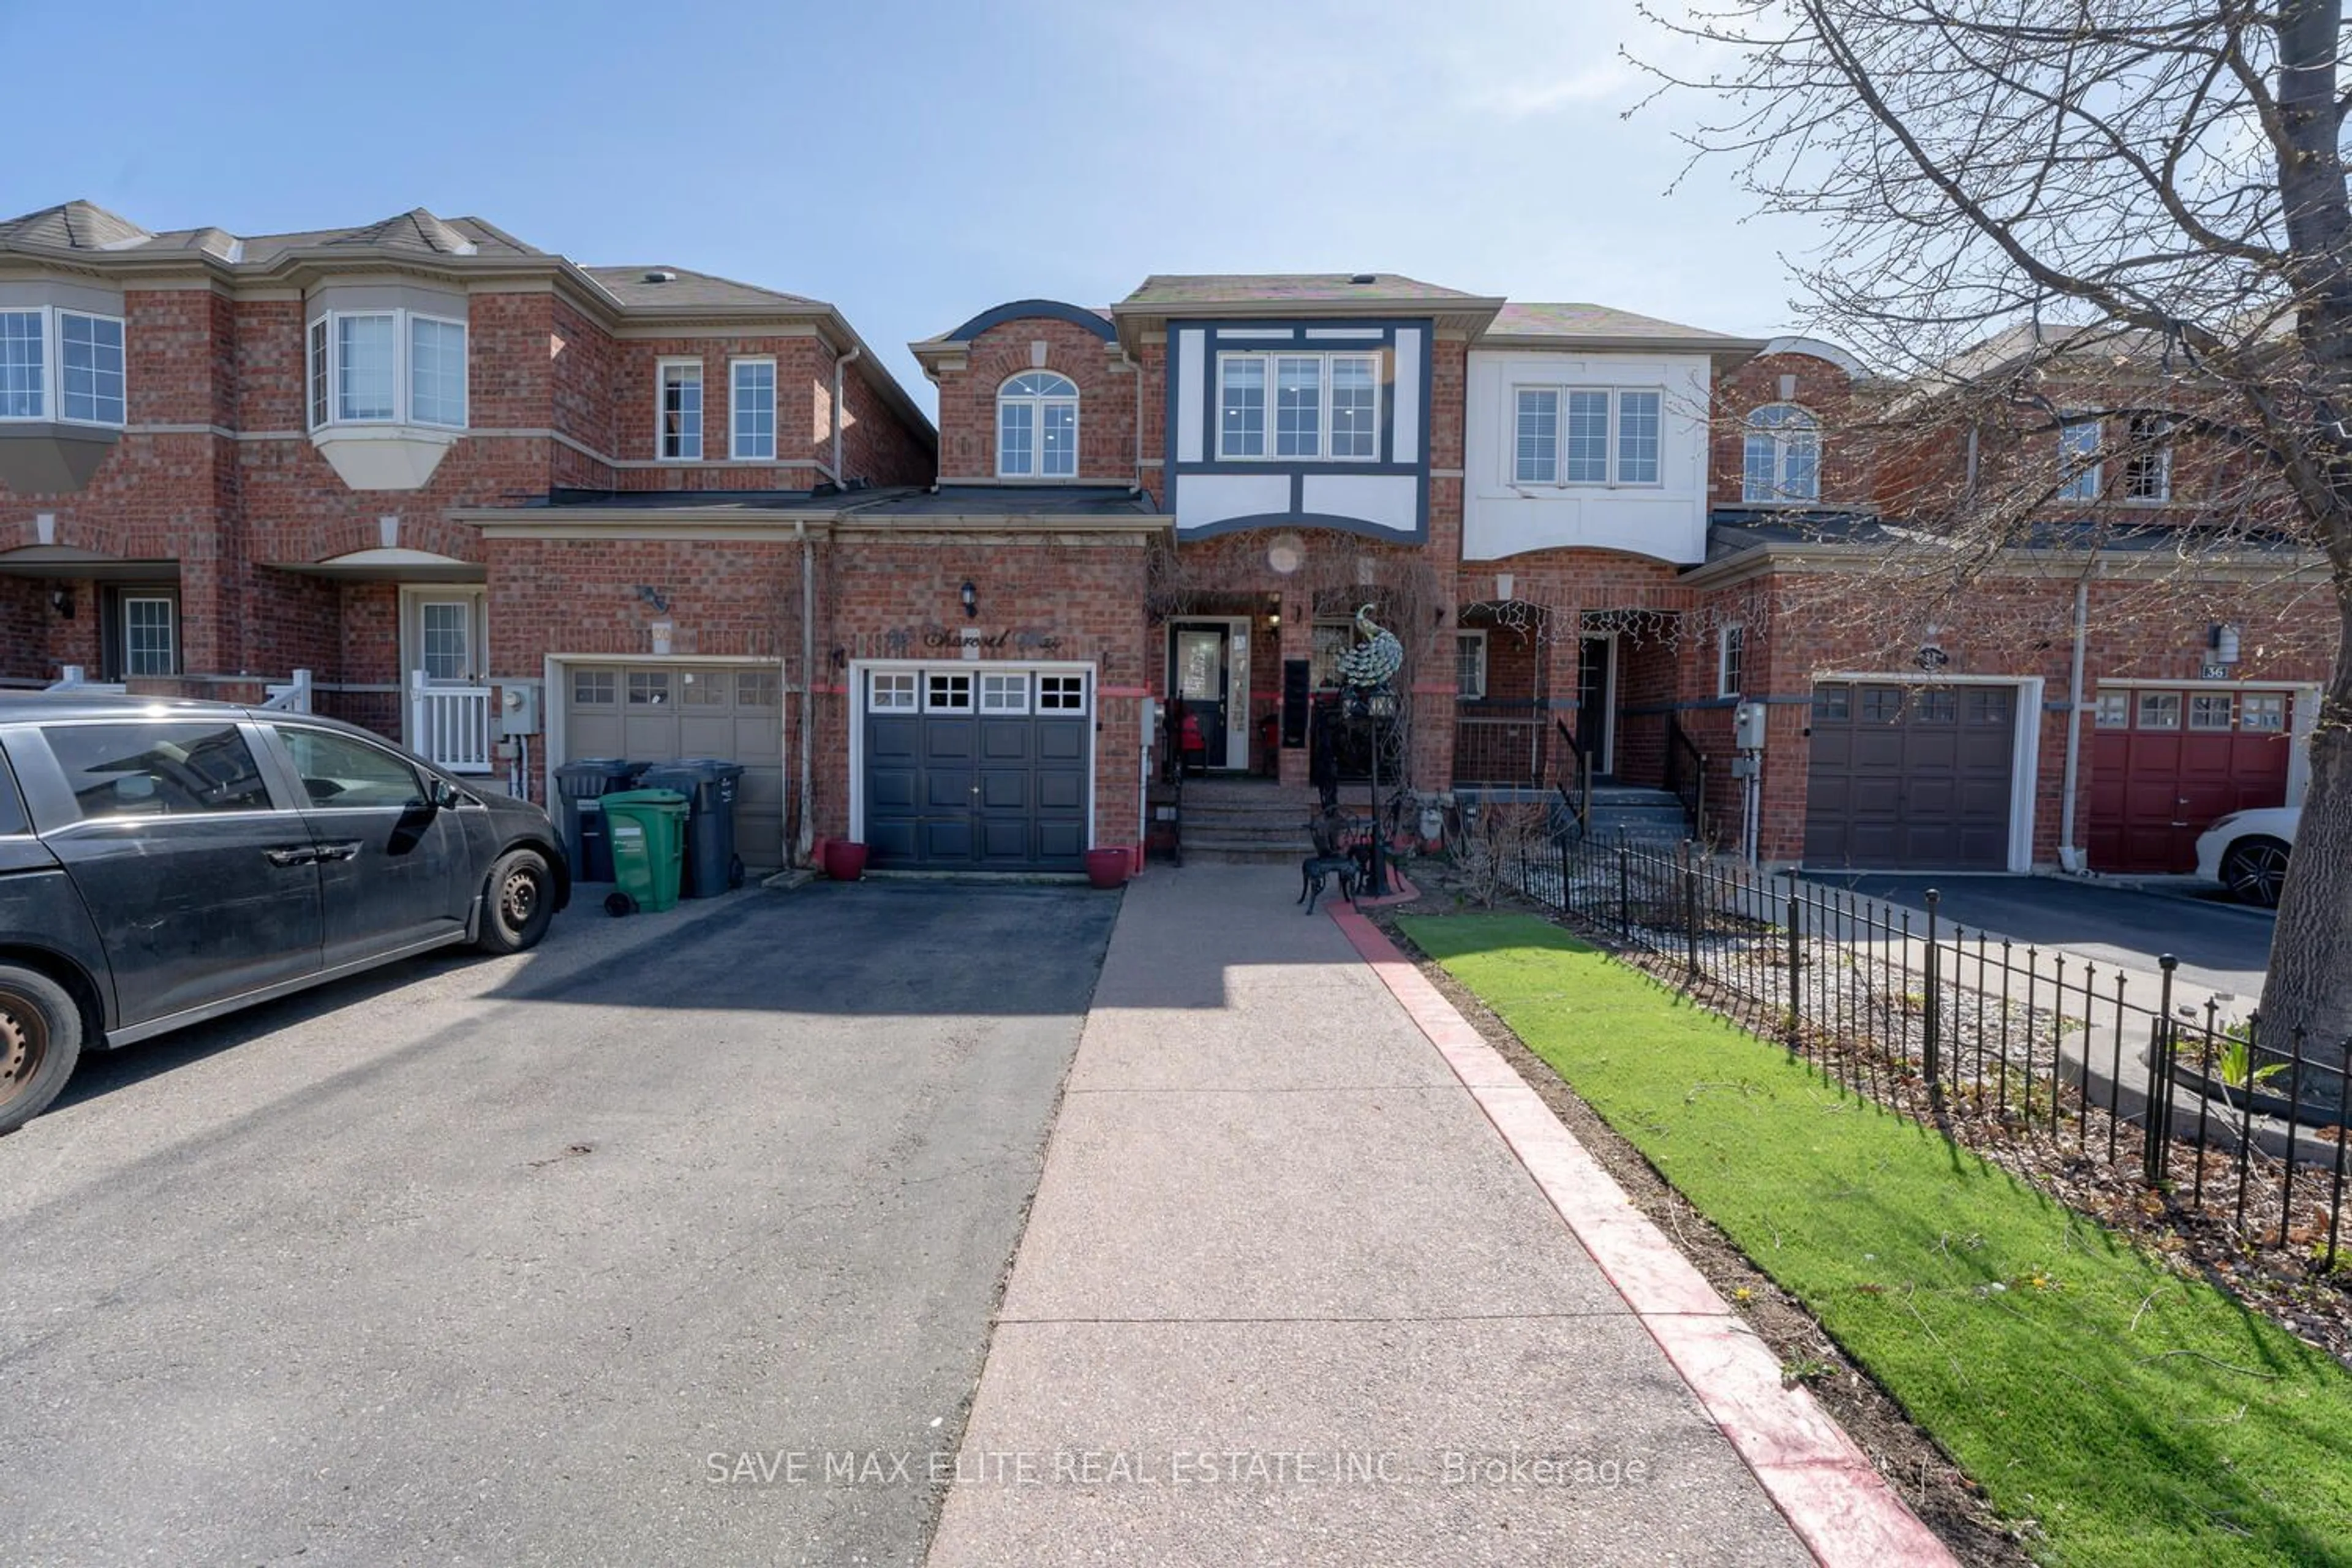 Street view for 32 Charcoal Way, Brampton Ontario L6Y 5P8